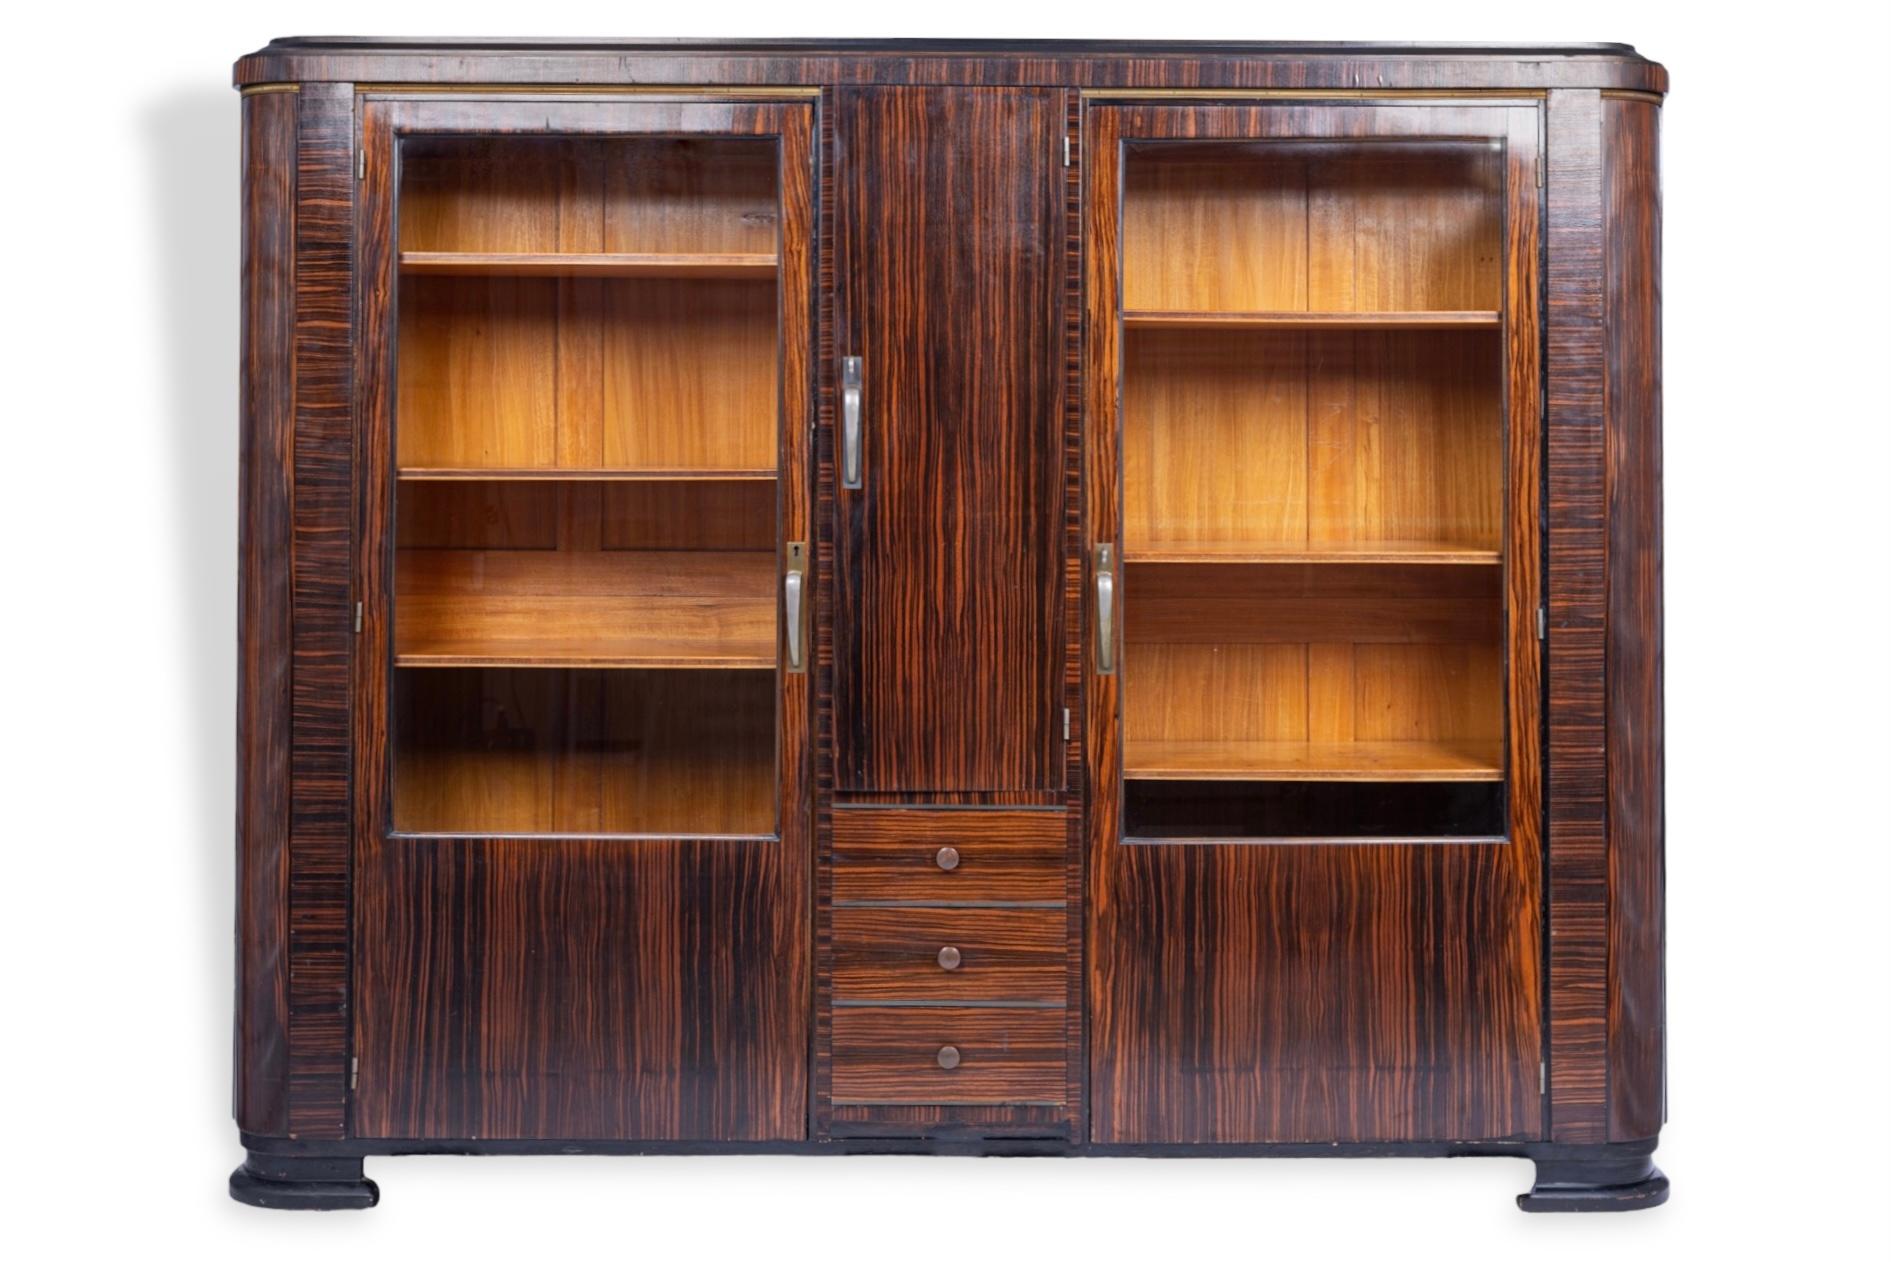 This truly exquisite antique Art Deco zebrawood and glass display cabinet or bar cabinet is circa 1930. It is expertly handcrafted from solid wood and zebrawood veneer with rich, deep browns and gorgeous zebra-striped grain patterning. This large,